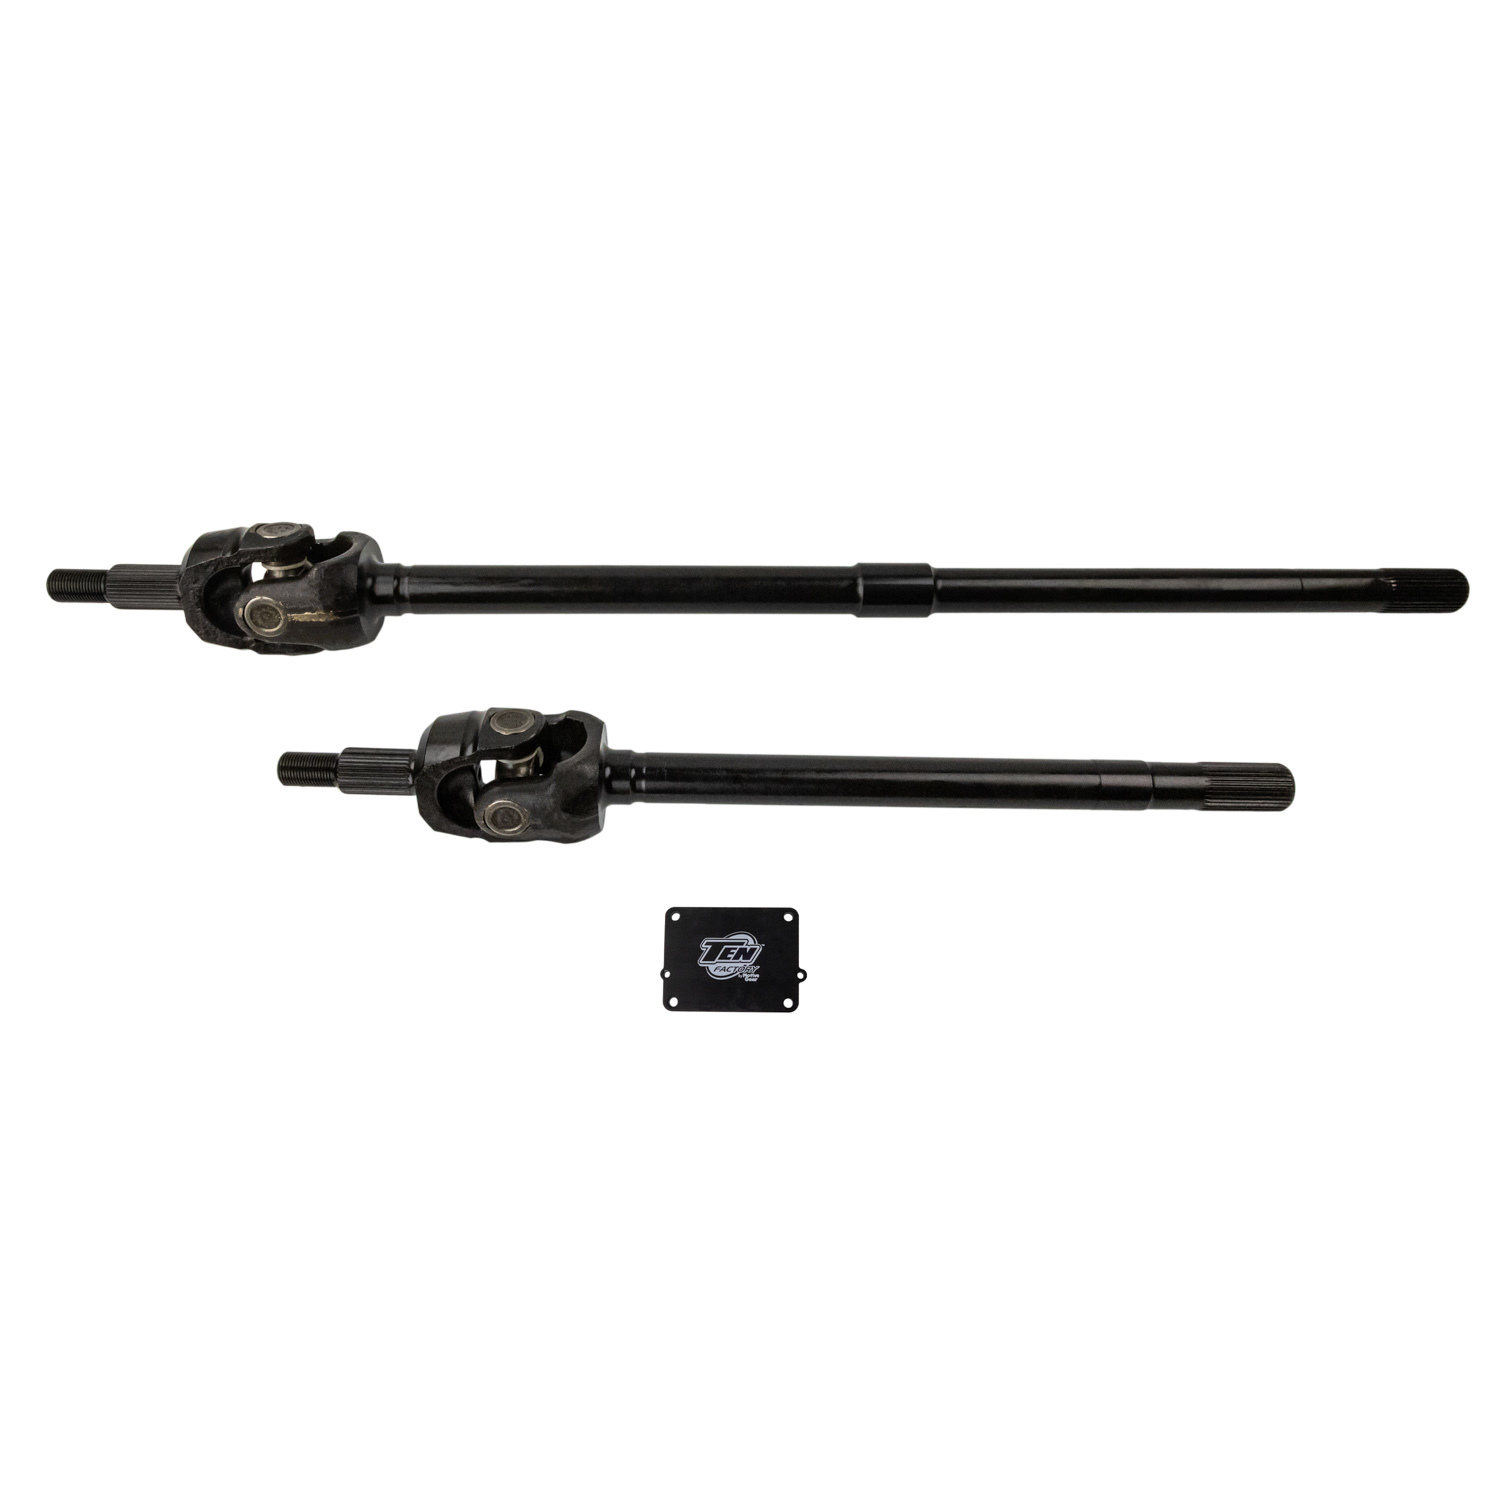 Ten Factory MG22190 Axle Shaft, 41-1/4 and 27-7/8 in Long, 32 Spline Carrier, FAD Block-Off Plate Included, Chromoly, Black Oxide, Front, Dana 44, Jeep Wrangler JL 2018-22, Kit